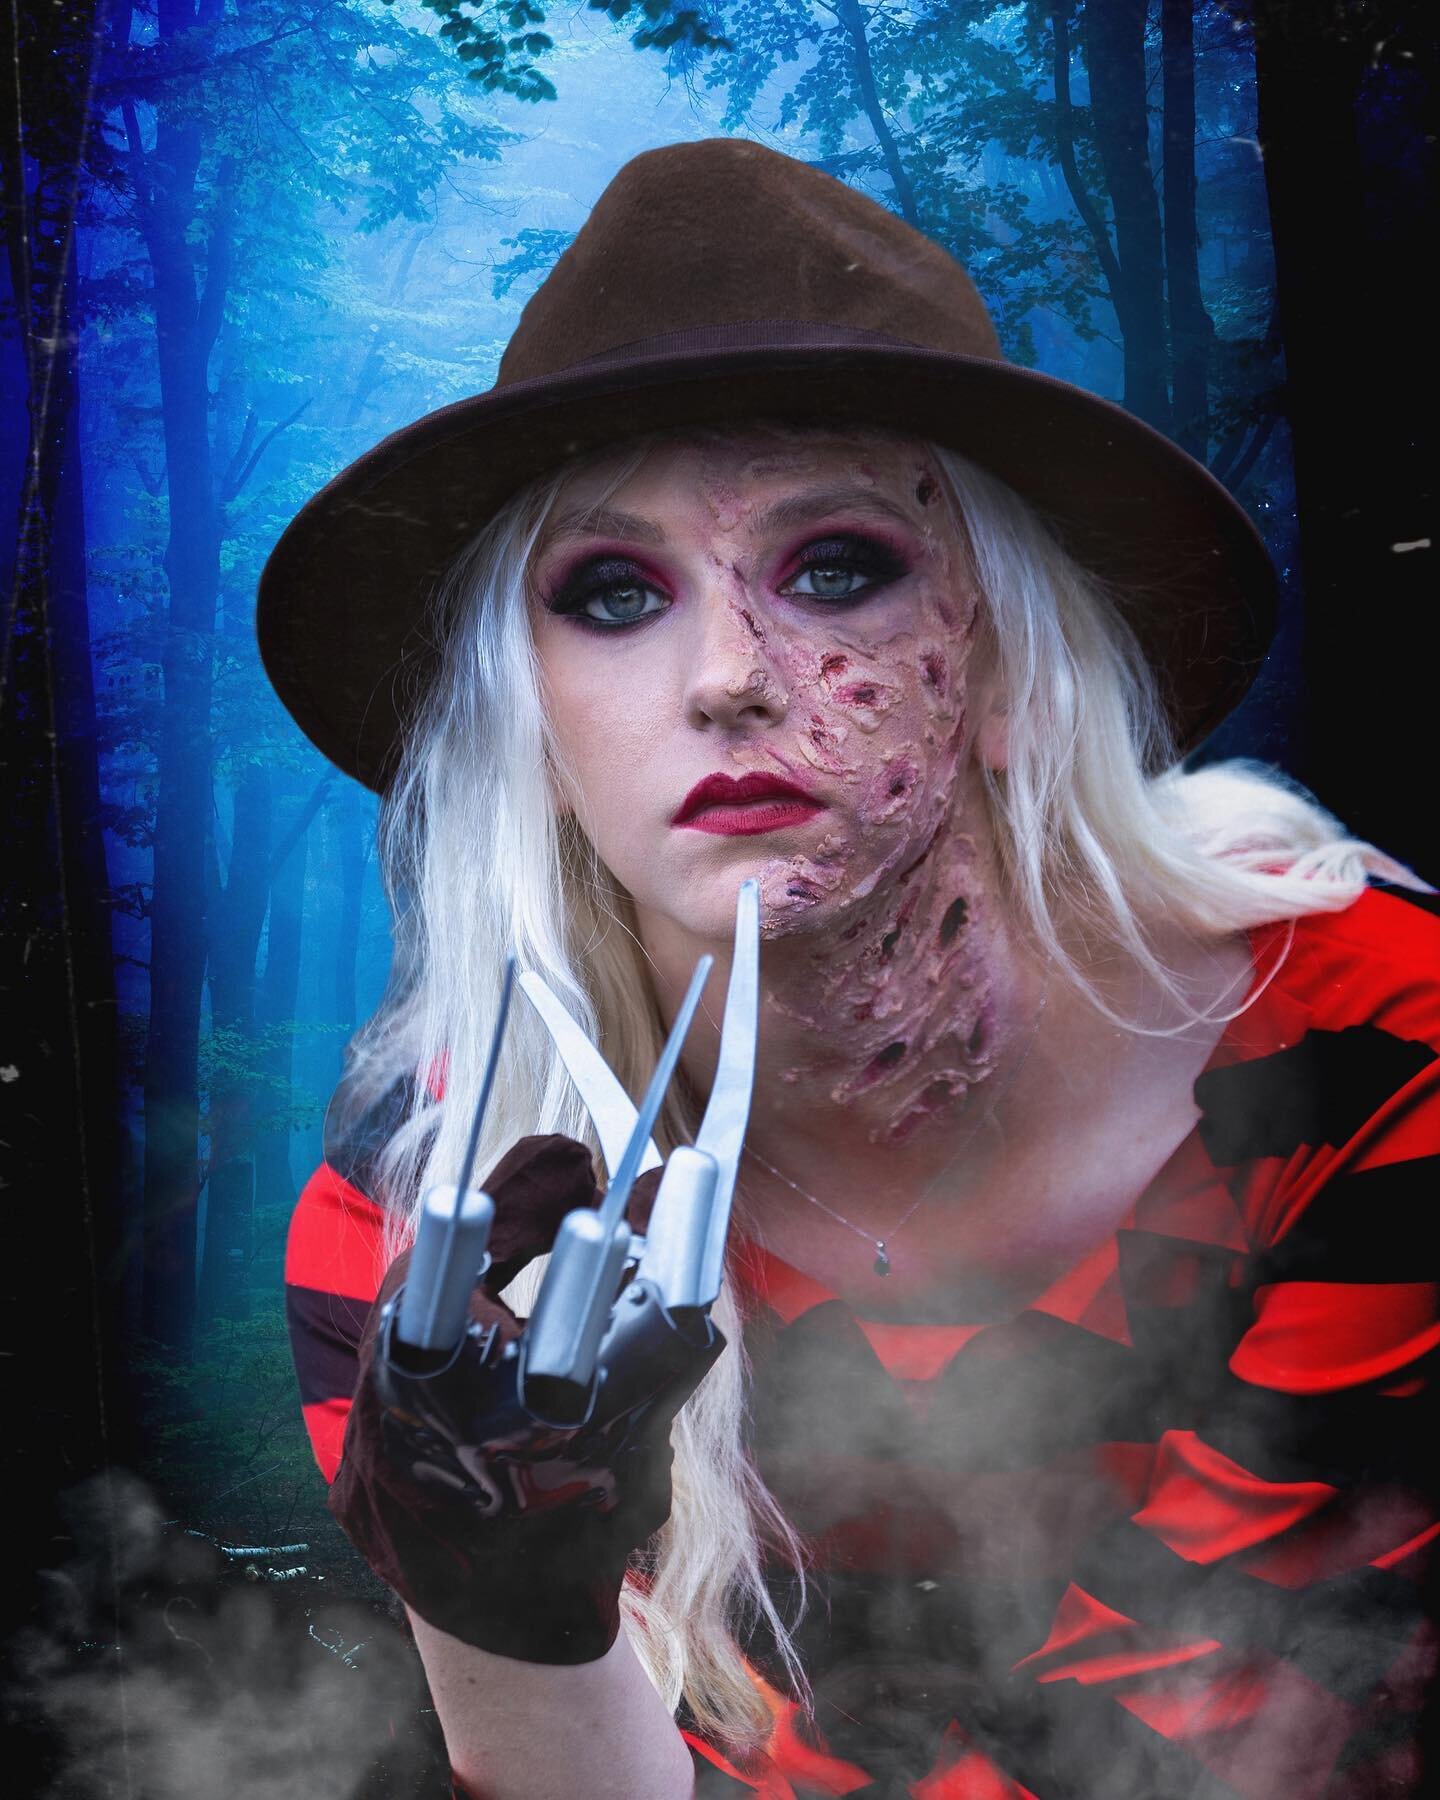 The awesome @rhxslapworth as Freddy Krueger, photographed at the recent Cardiff Shooters Halloween event. Second photo edit.

Model: @rhxslapworth 
Event: @cardiffshooters 
Location: Llandaff Village
Big Thanks to: @mis7er.p @ijs.images @j84_photogra